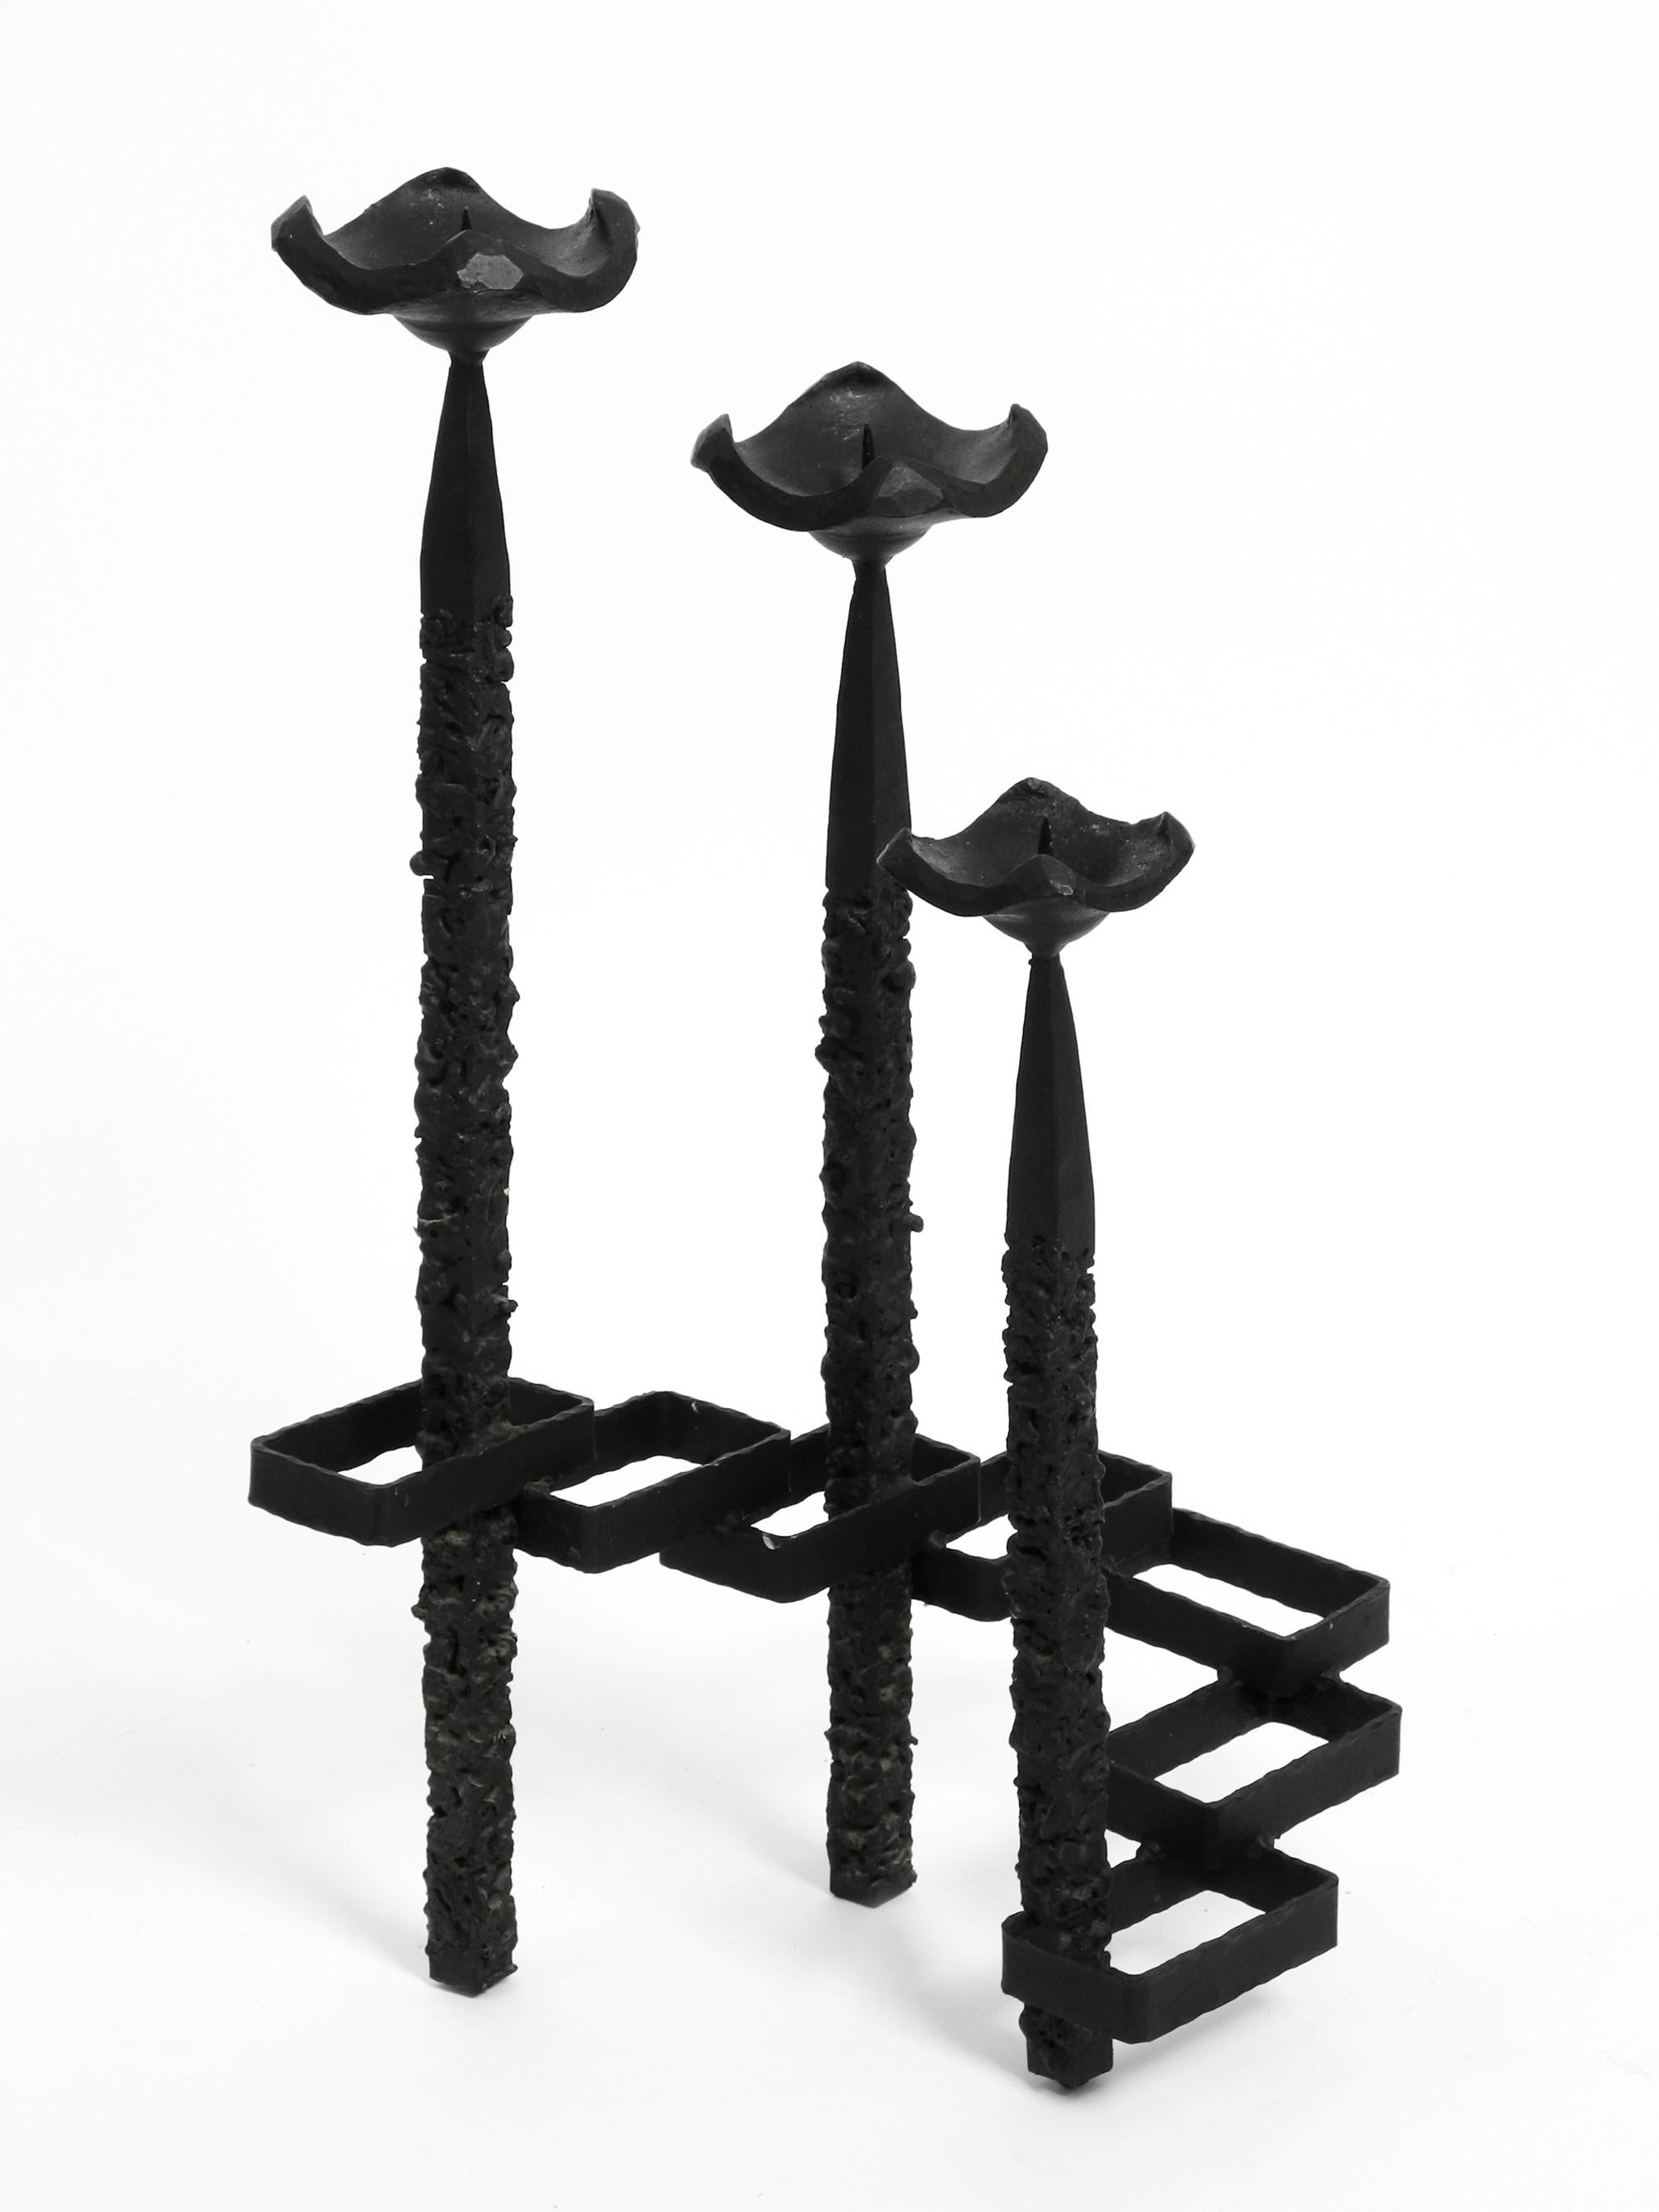 Large Floor or Table Candle Holder Made of Wrought Iron in Brutalist Design  For Sale 3